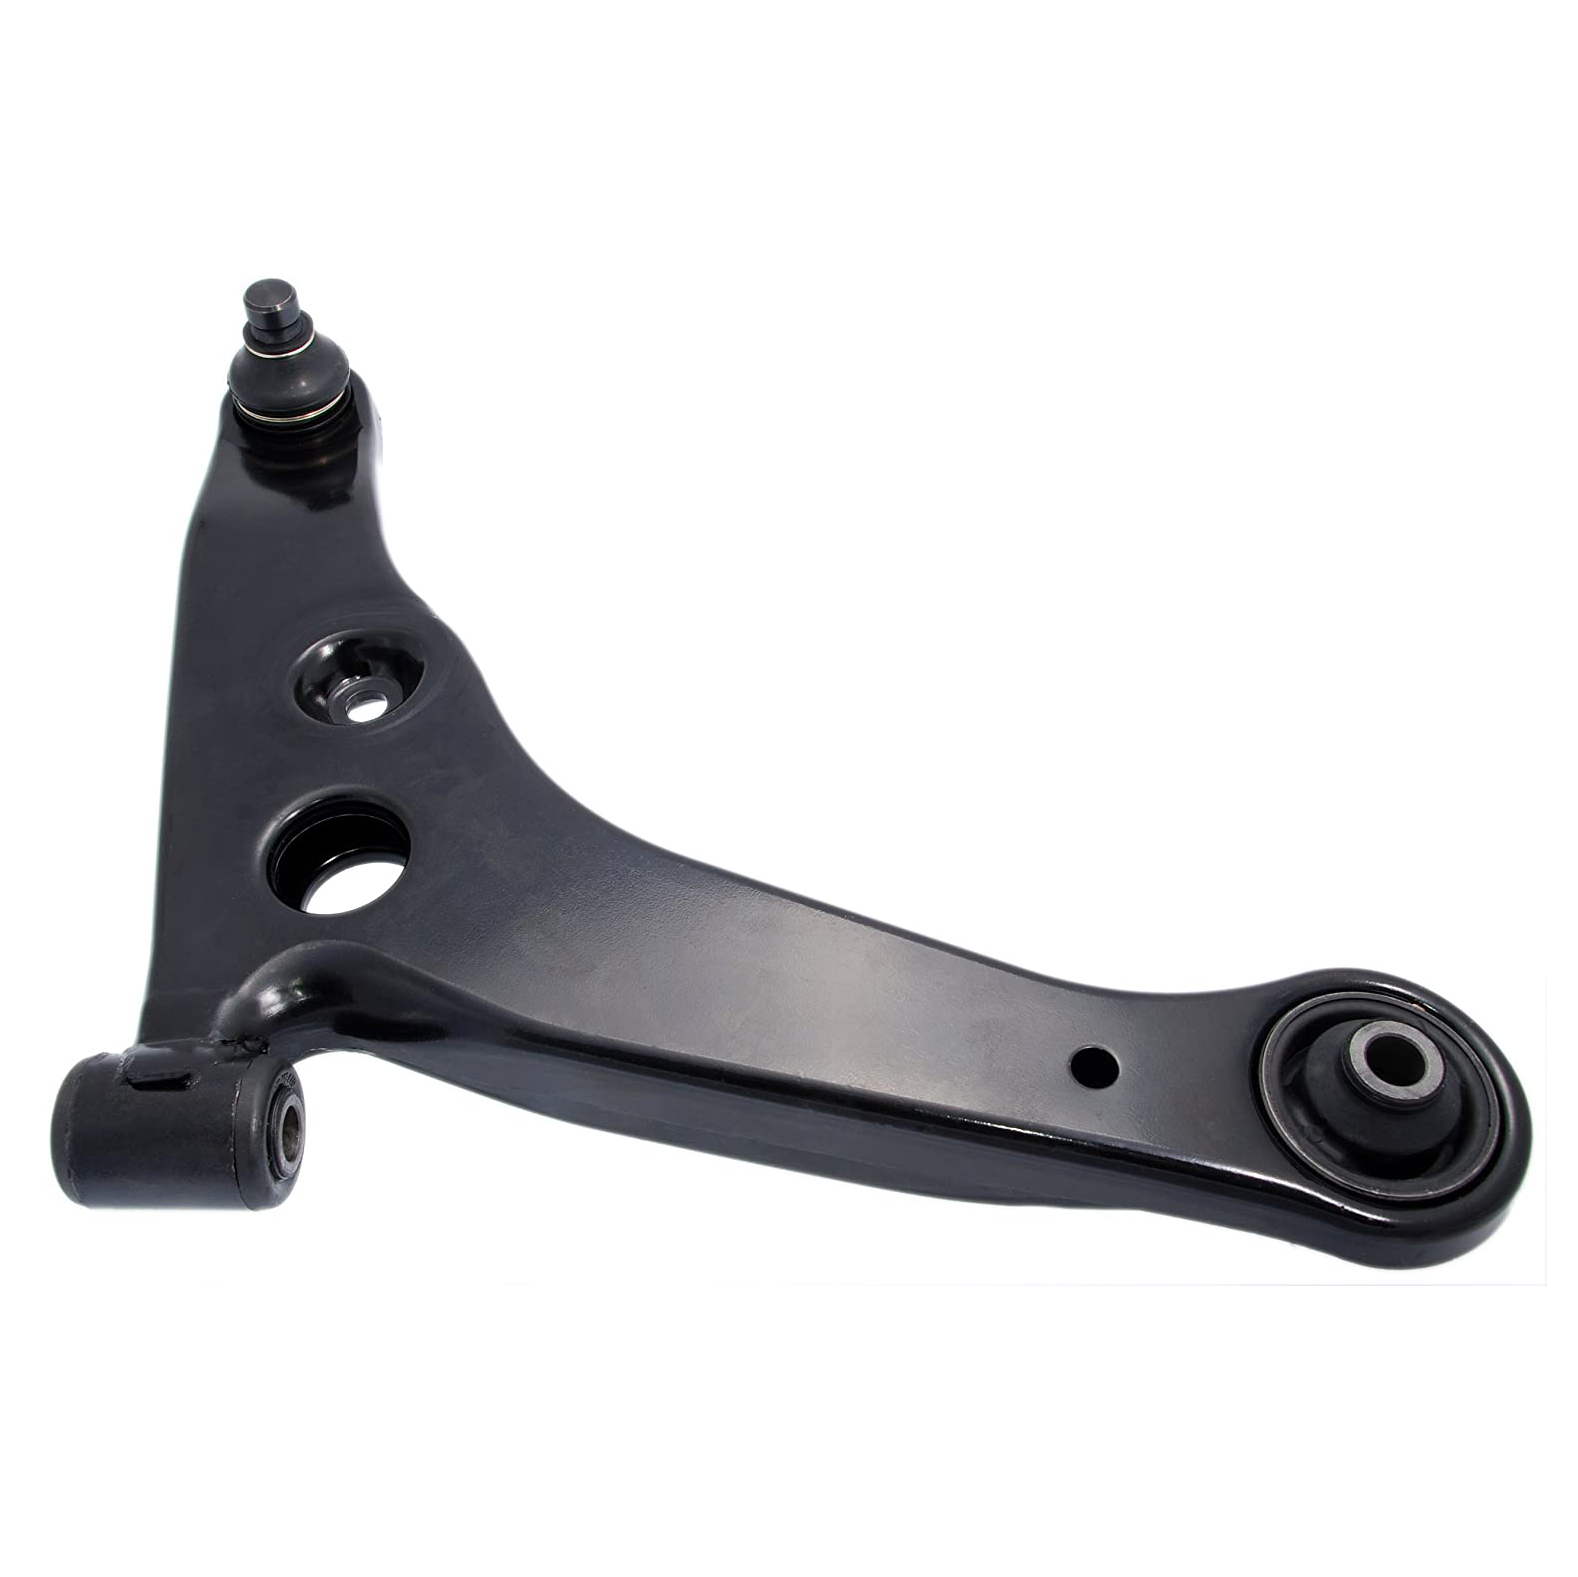 Lower front Control arm for Mitsubishi 2000-2013,2003-2008 Lancer MR403419 MR403420 4013A273